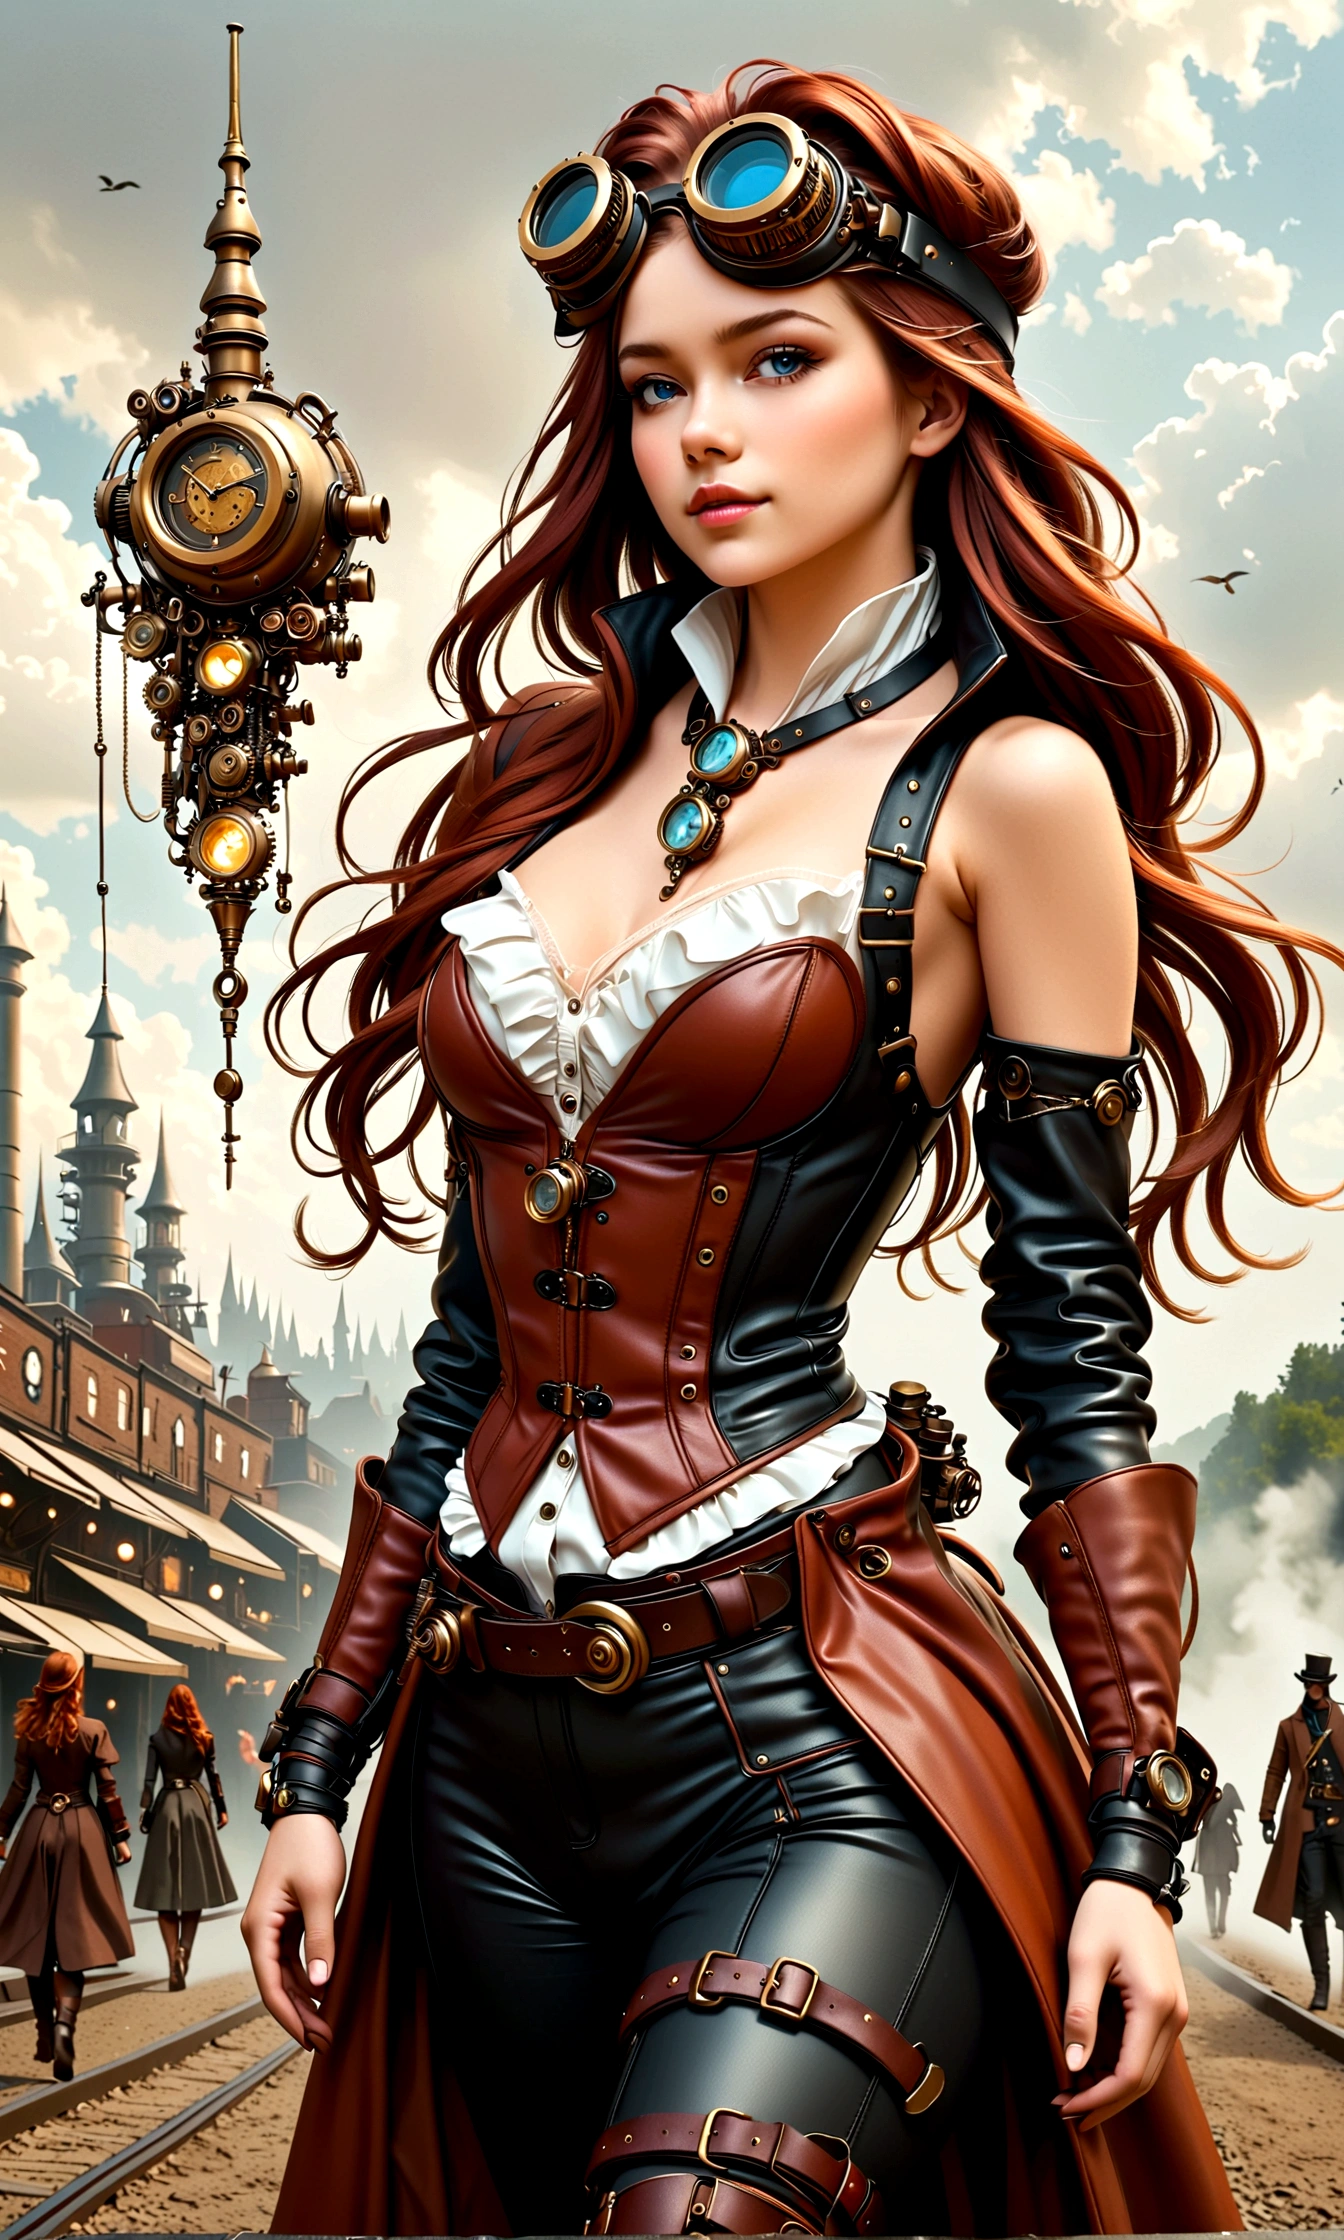 ganzkörper, ganzkörper bild(head to toe in frame)((Masterpiece)),mfbp1, (Best Quality), (Cinematic),(Extremely detailed CG Unity 8k wallpaper), 1 girl, fit,Delicious company, small breasts,(no goggles on face)(very long redhair),one Stunning red-haired steampunk woman who lost her forearm in an accident received a beautifully designed, fine and perfectly fitting robotic prosthesis (steampunk style) as a replacement, posing coolly in front of machines and factories. With this prosthesis she shows us a sealed, delicate poison glass bottle with blue liquid in it. Hand-forearm prosthesis made of brass and leather. She wears tight-fitting clothing (steampunk leather suit with cut-outs on hips and belly and buckles).the forearms are nude to show the prothetic arm, hoes and decorative wielding goggles in her hair on head, also made of brass and leather. The landscape is a bit gloomy, but also impressive.,1 line drawing,make up,steampunk style
